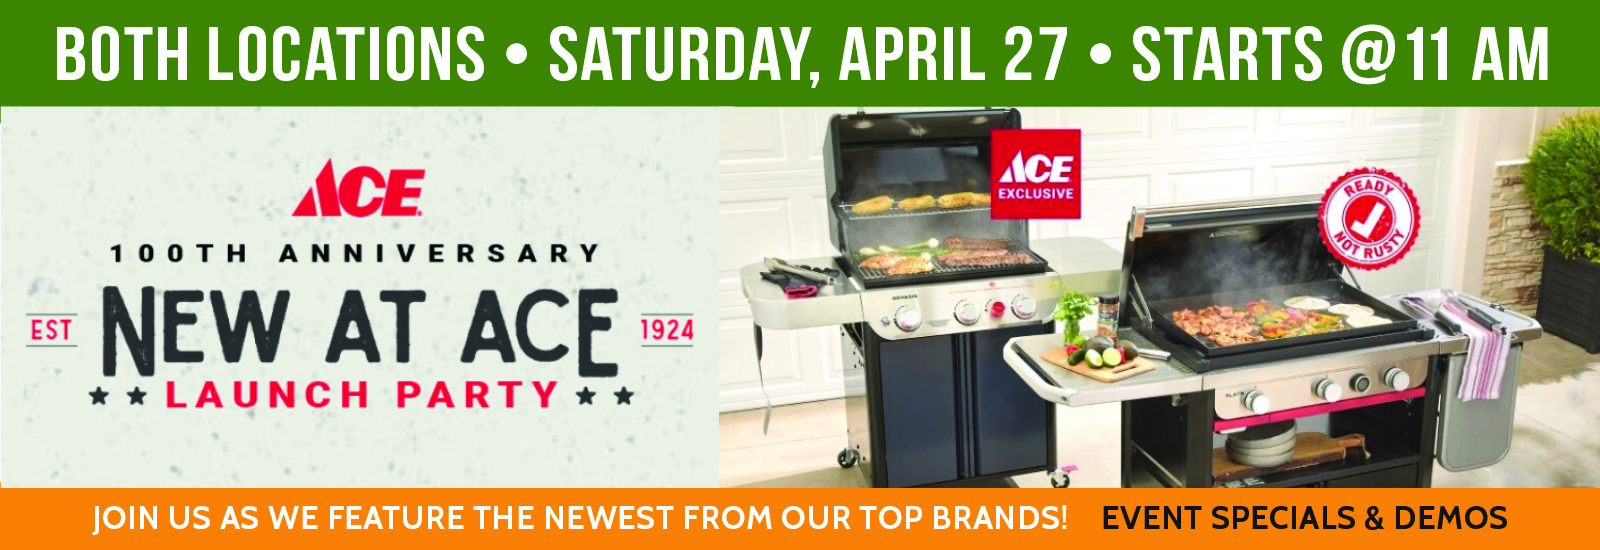 join us April 27 for the New at Ace Event